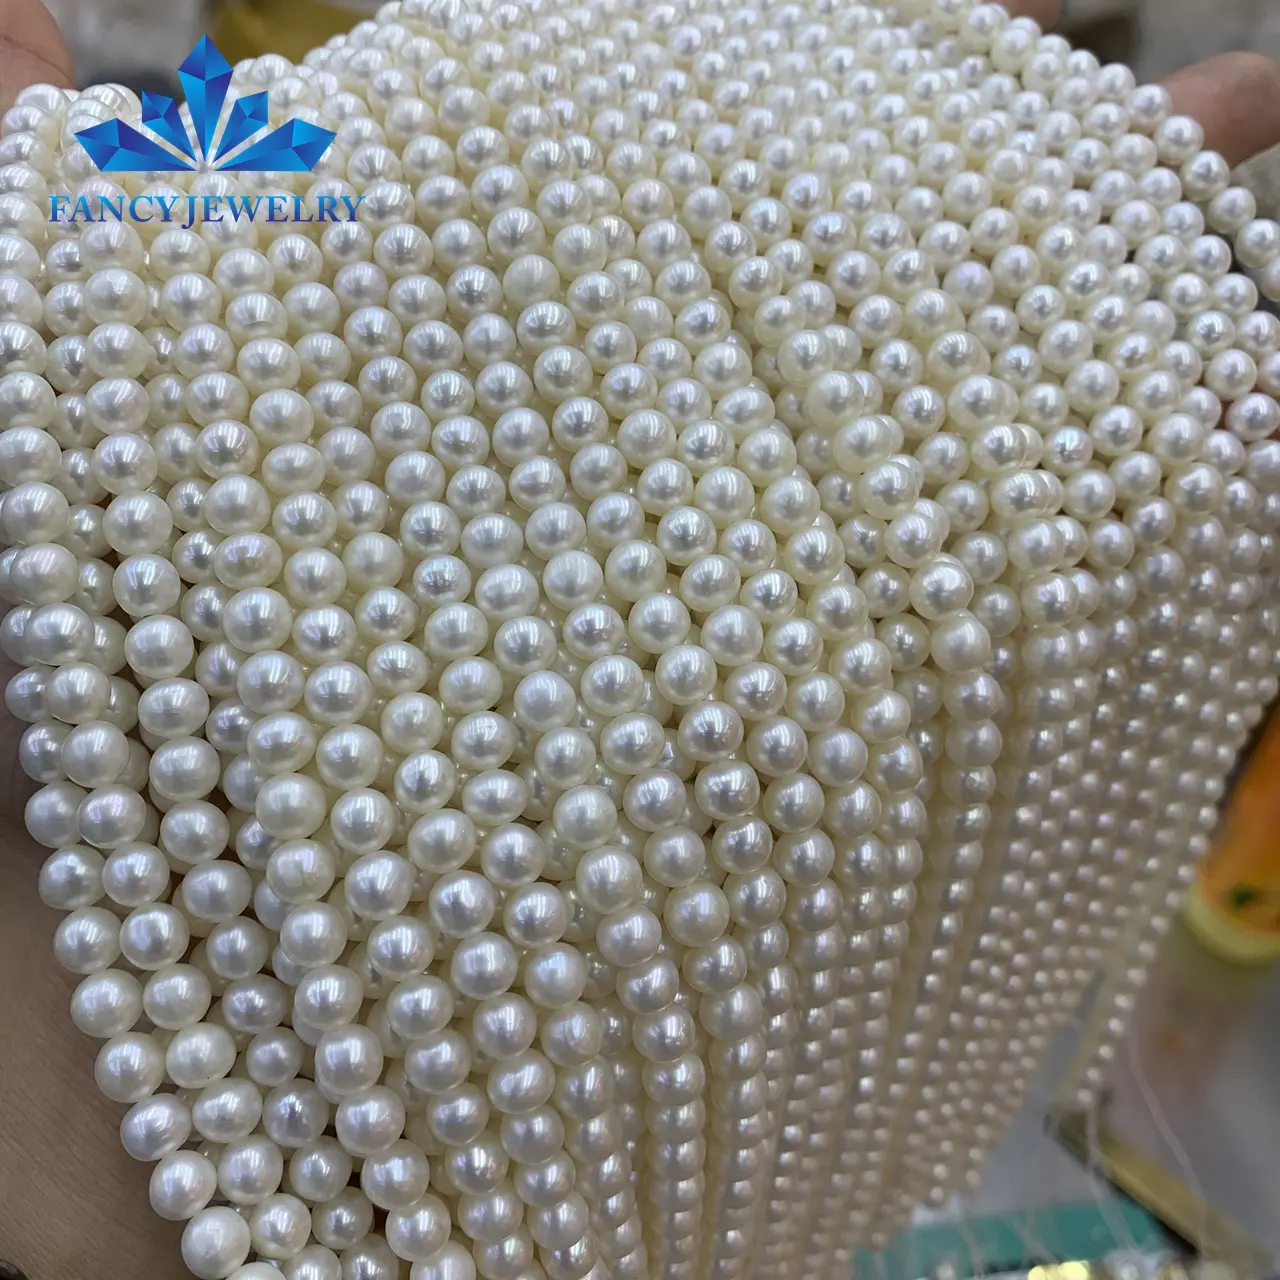 Wholesale AAA grade Near round shape slight blemish 5-6mm white natural freshwater pearl loose long pearl string price